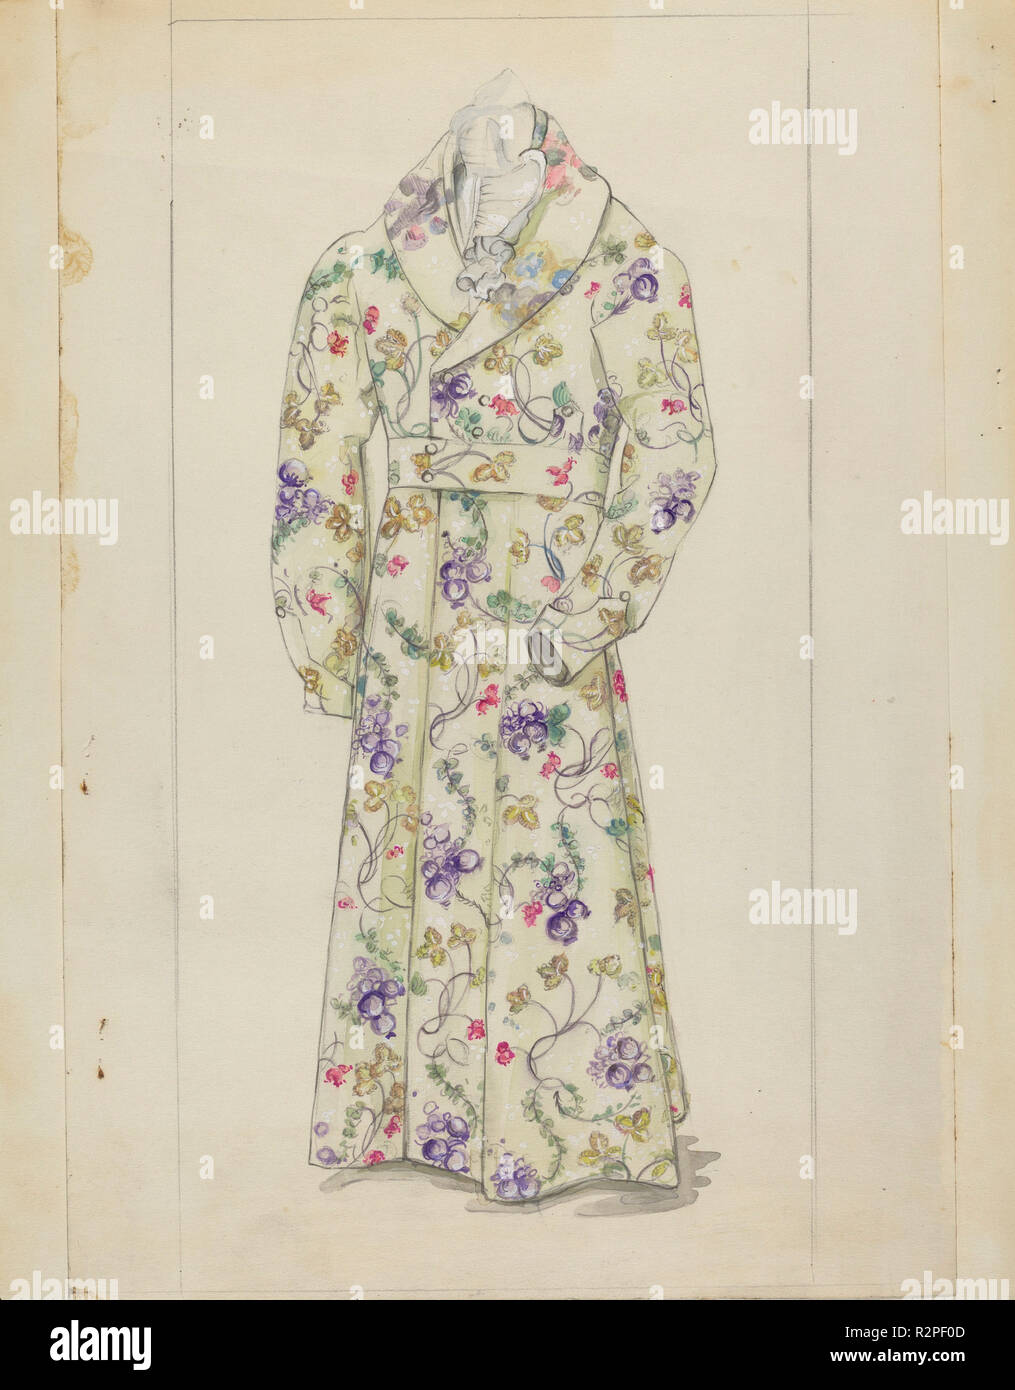 Man's Dressing Gown. Dated: c. 1939. Dimensions: overall: 28.7 x 22.6 cm (11 5/16 x 8 7/8 in.). Medium: watercolor, graphite, and gouache on paper. Museum: National Gallery of Art, Washington DC. Author: Jessie M. Benge. Stock Photo